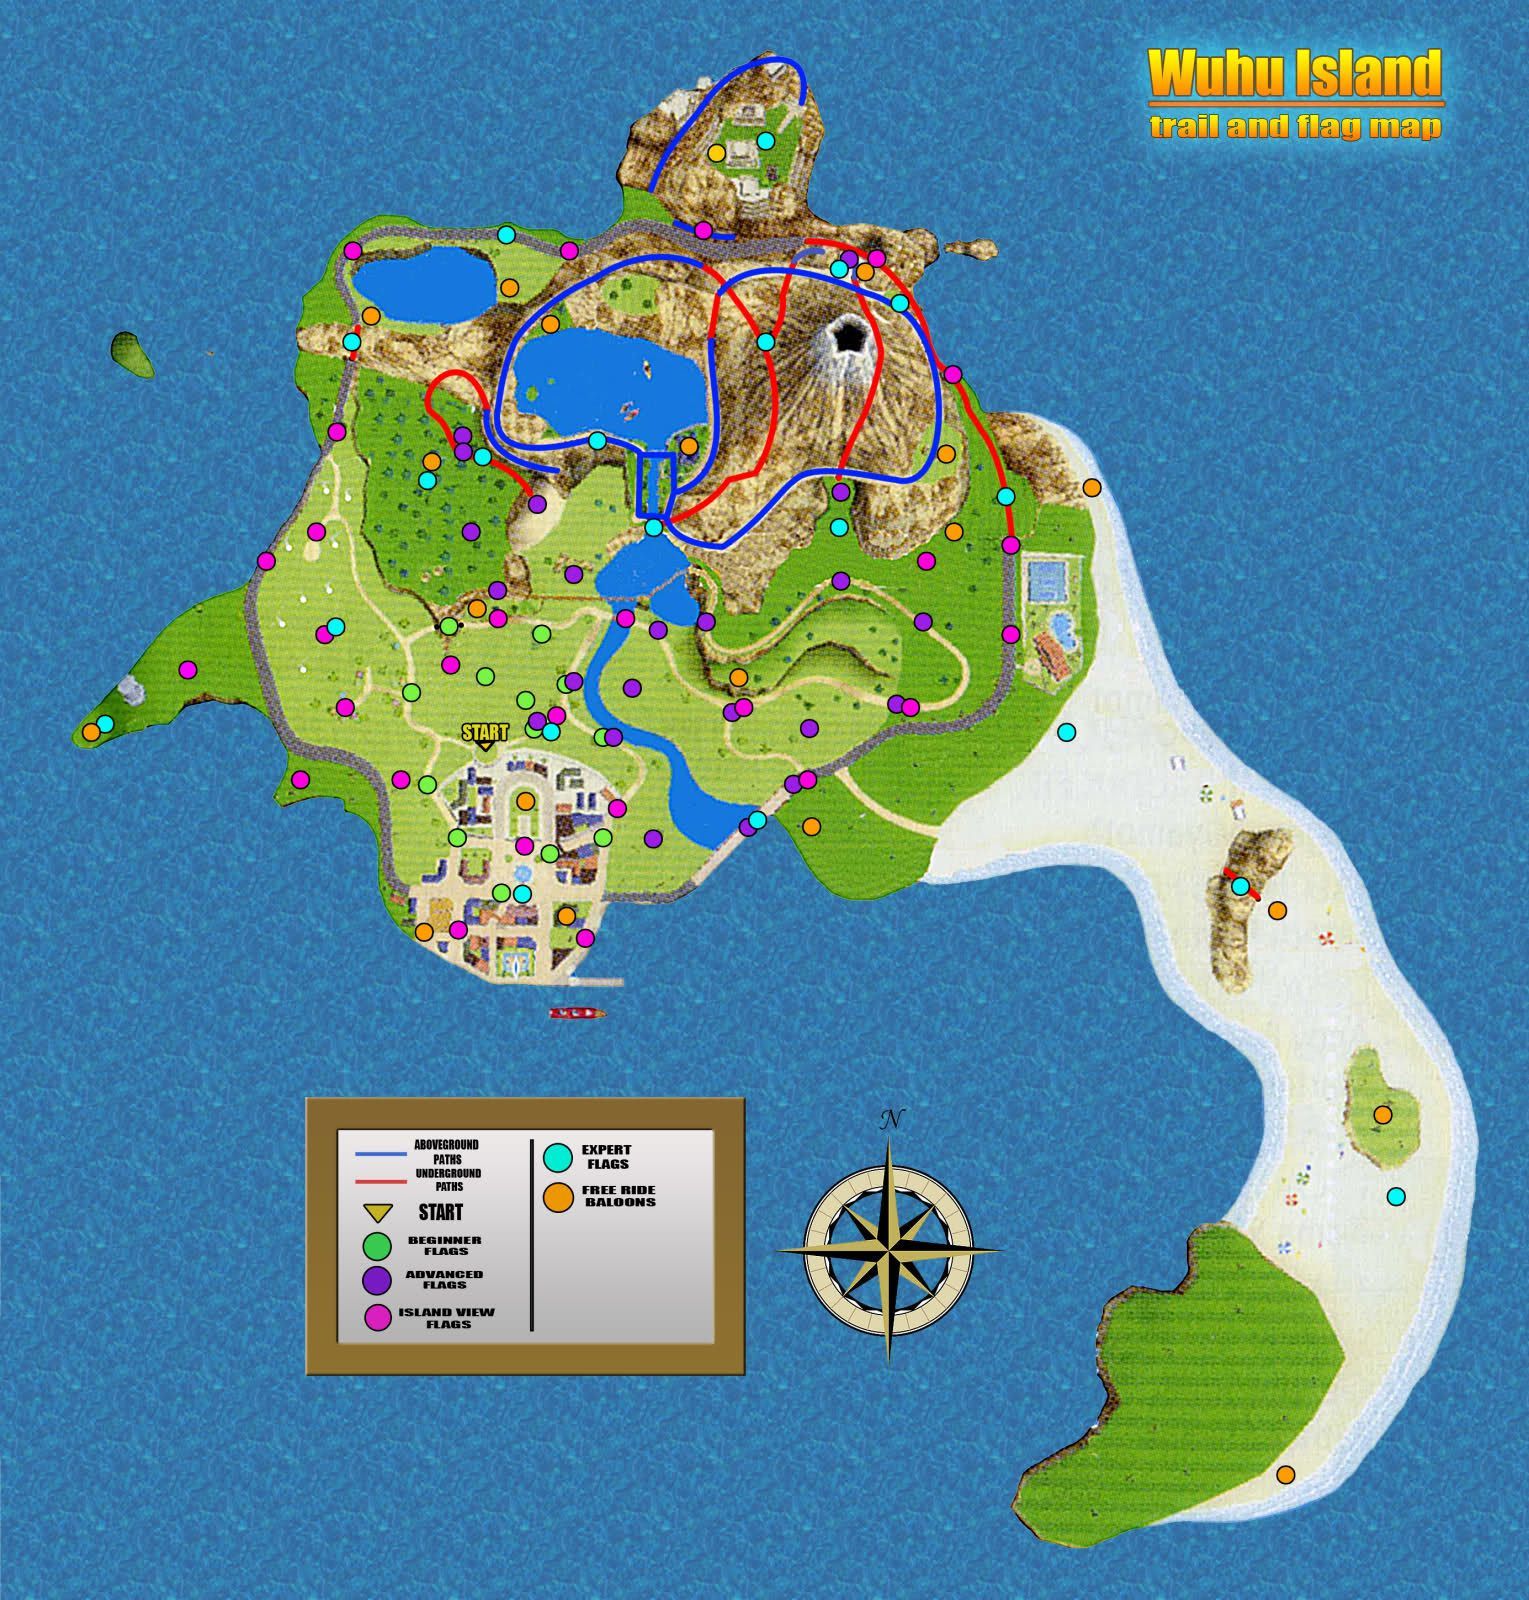 Wii Sports Resort guide map of the MaKa WuHu Island in the island flyover i points. Wii sports resort, Wii sports, Island map